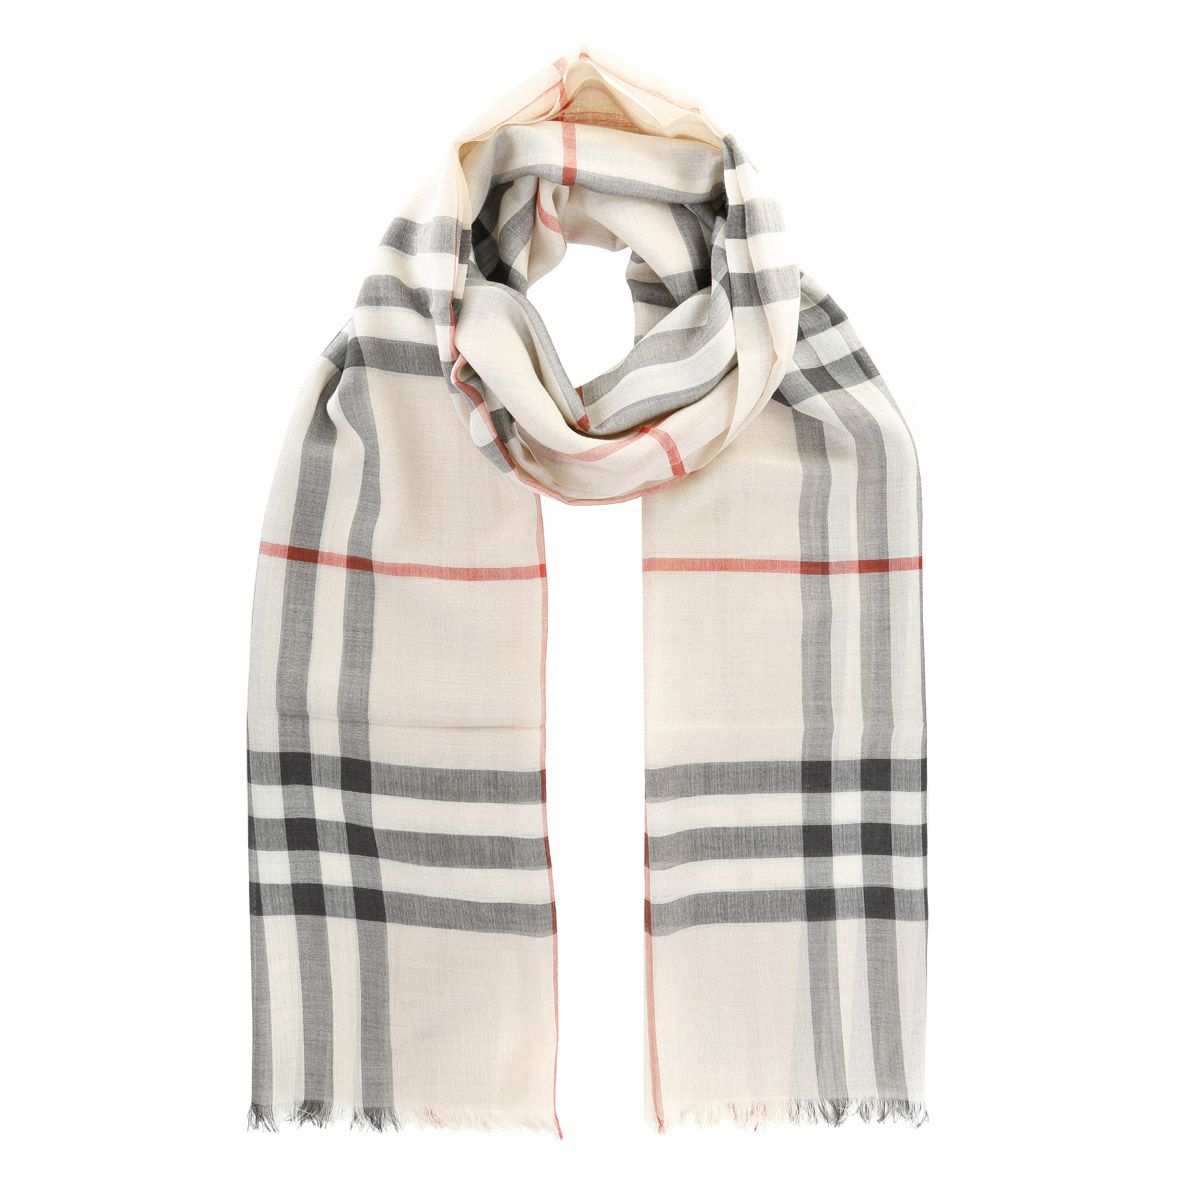 Burberry Giant Gauze Scarf Check Trench In Beige Fashionette Trending Accessories Scarf Gauze Scarf